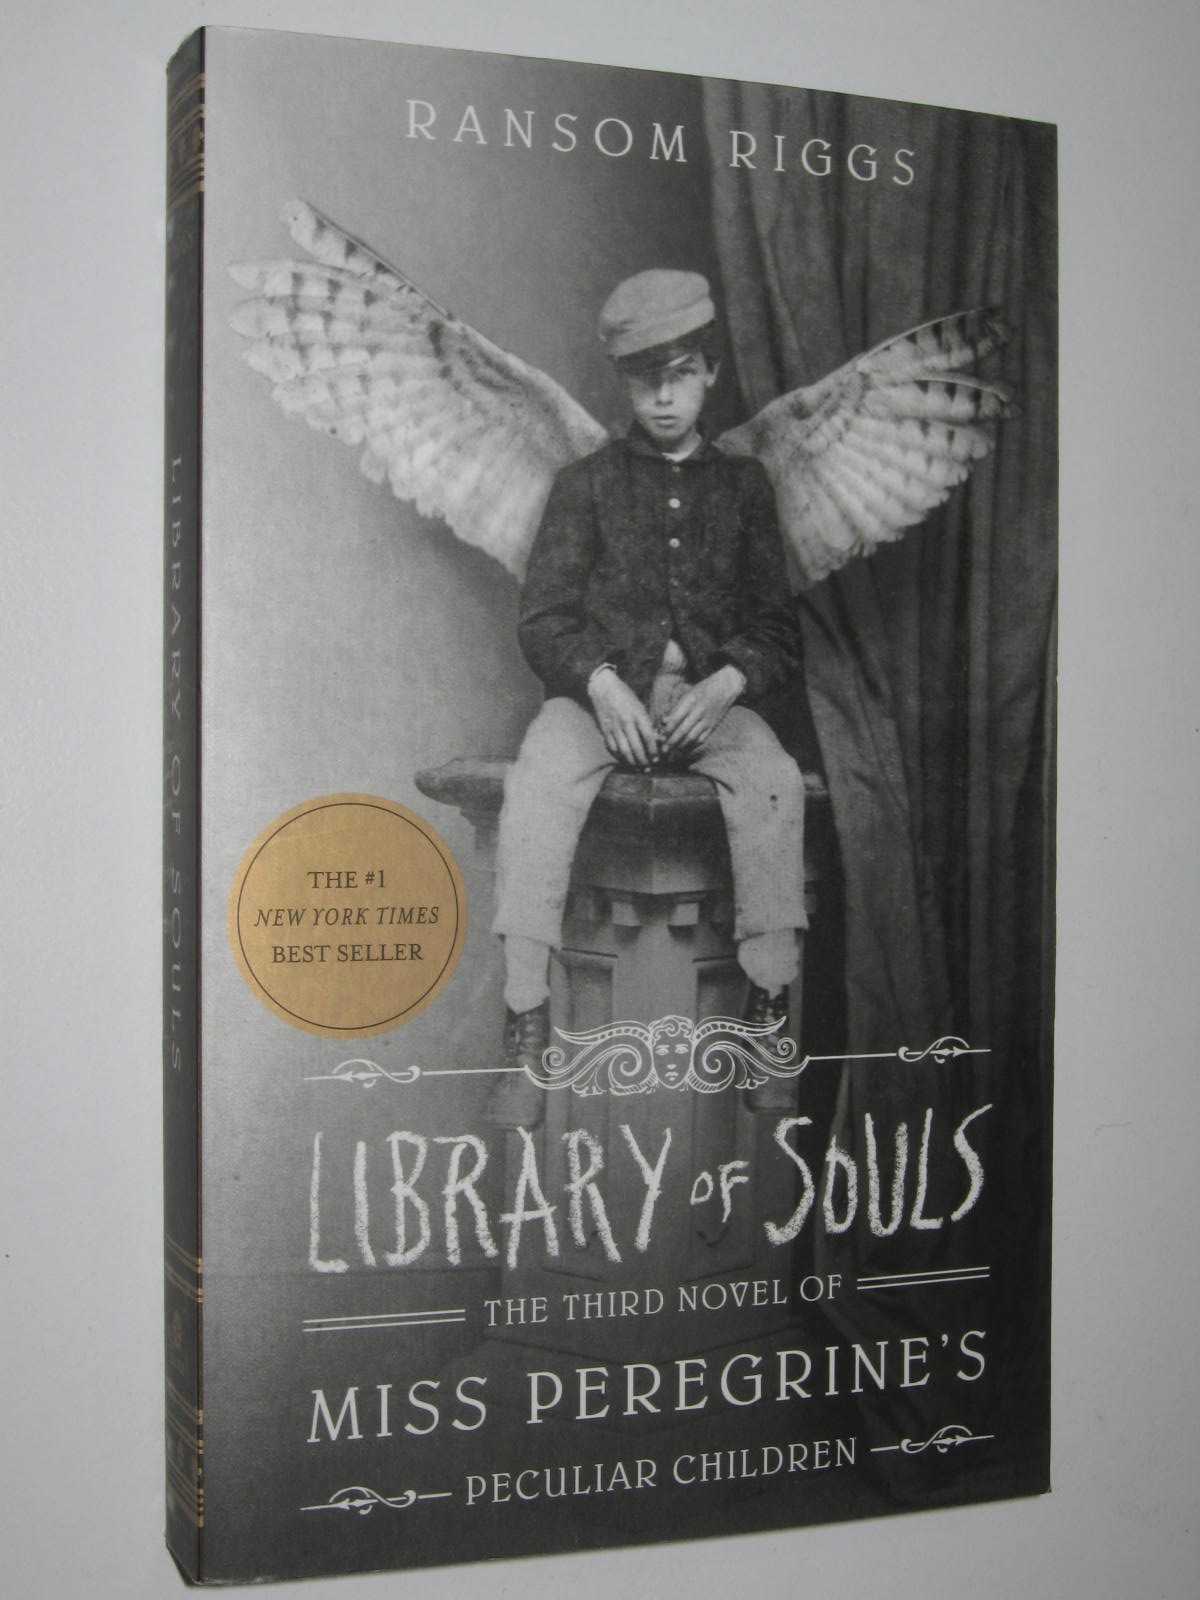 Miss　Series　Children　Library　Peregrine's　Peculiar　Of　Souls　#3